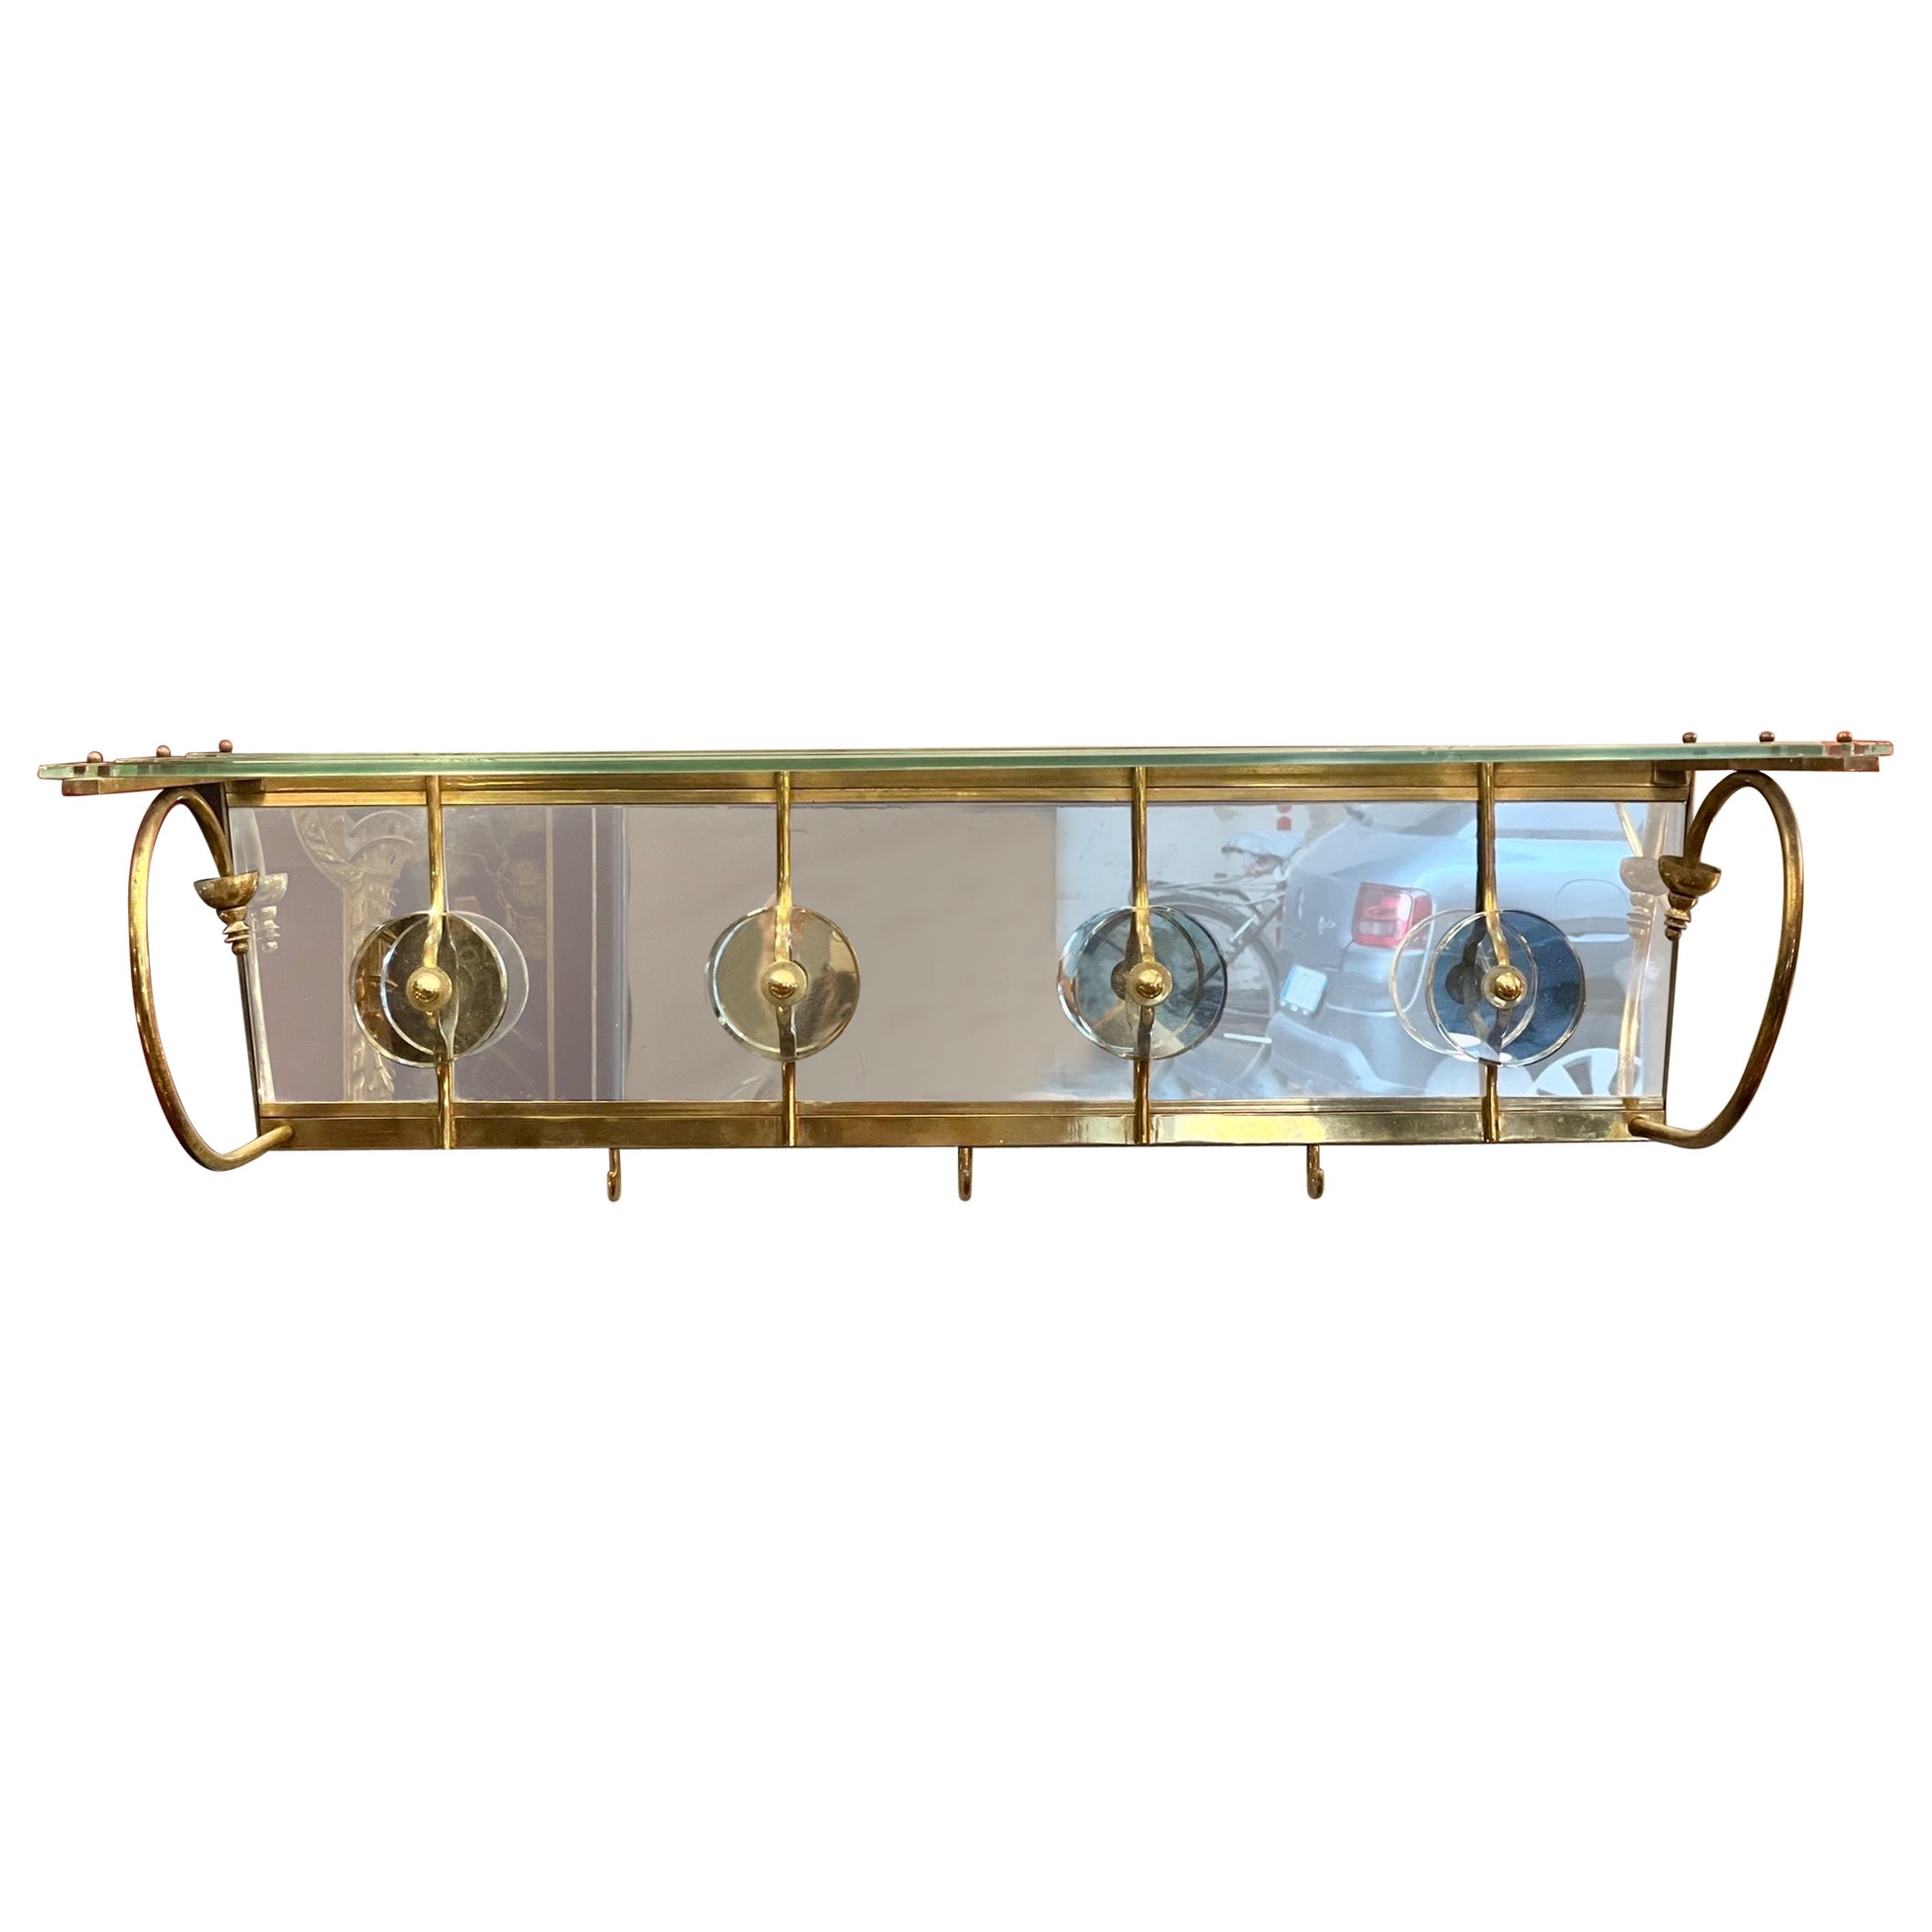 Vintage Crystal and Brass Coat Racks by Luigi Brusotti 1950s For Sale